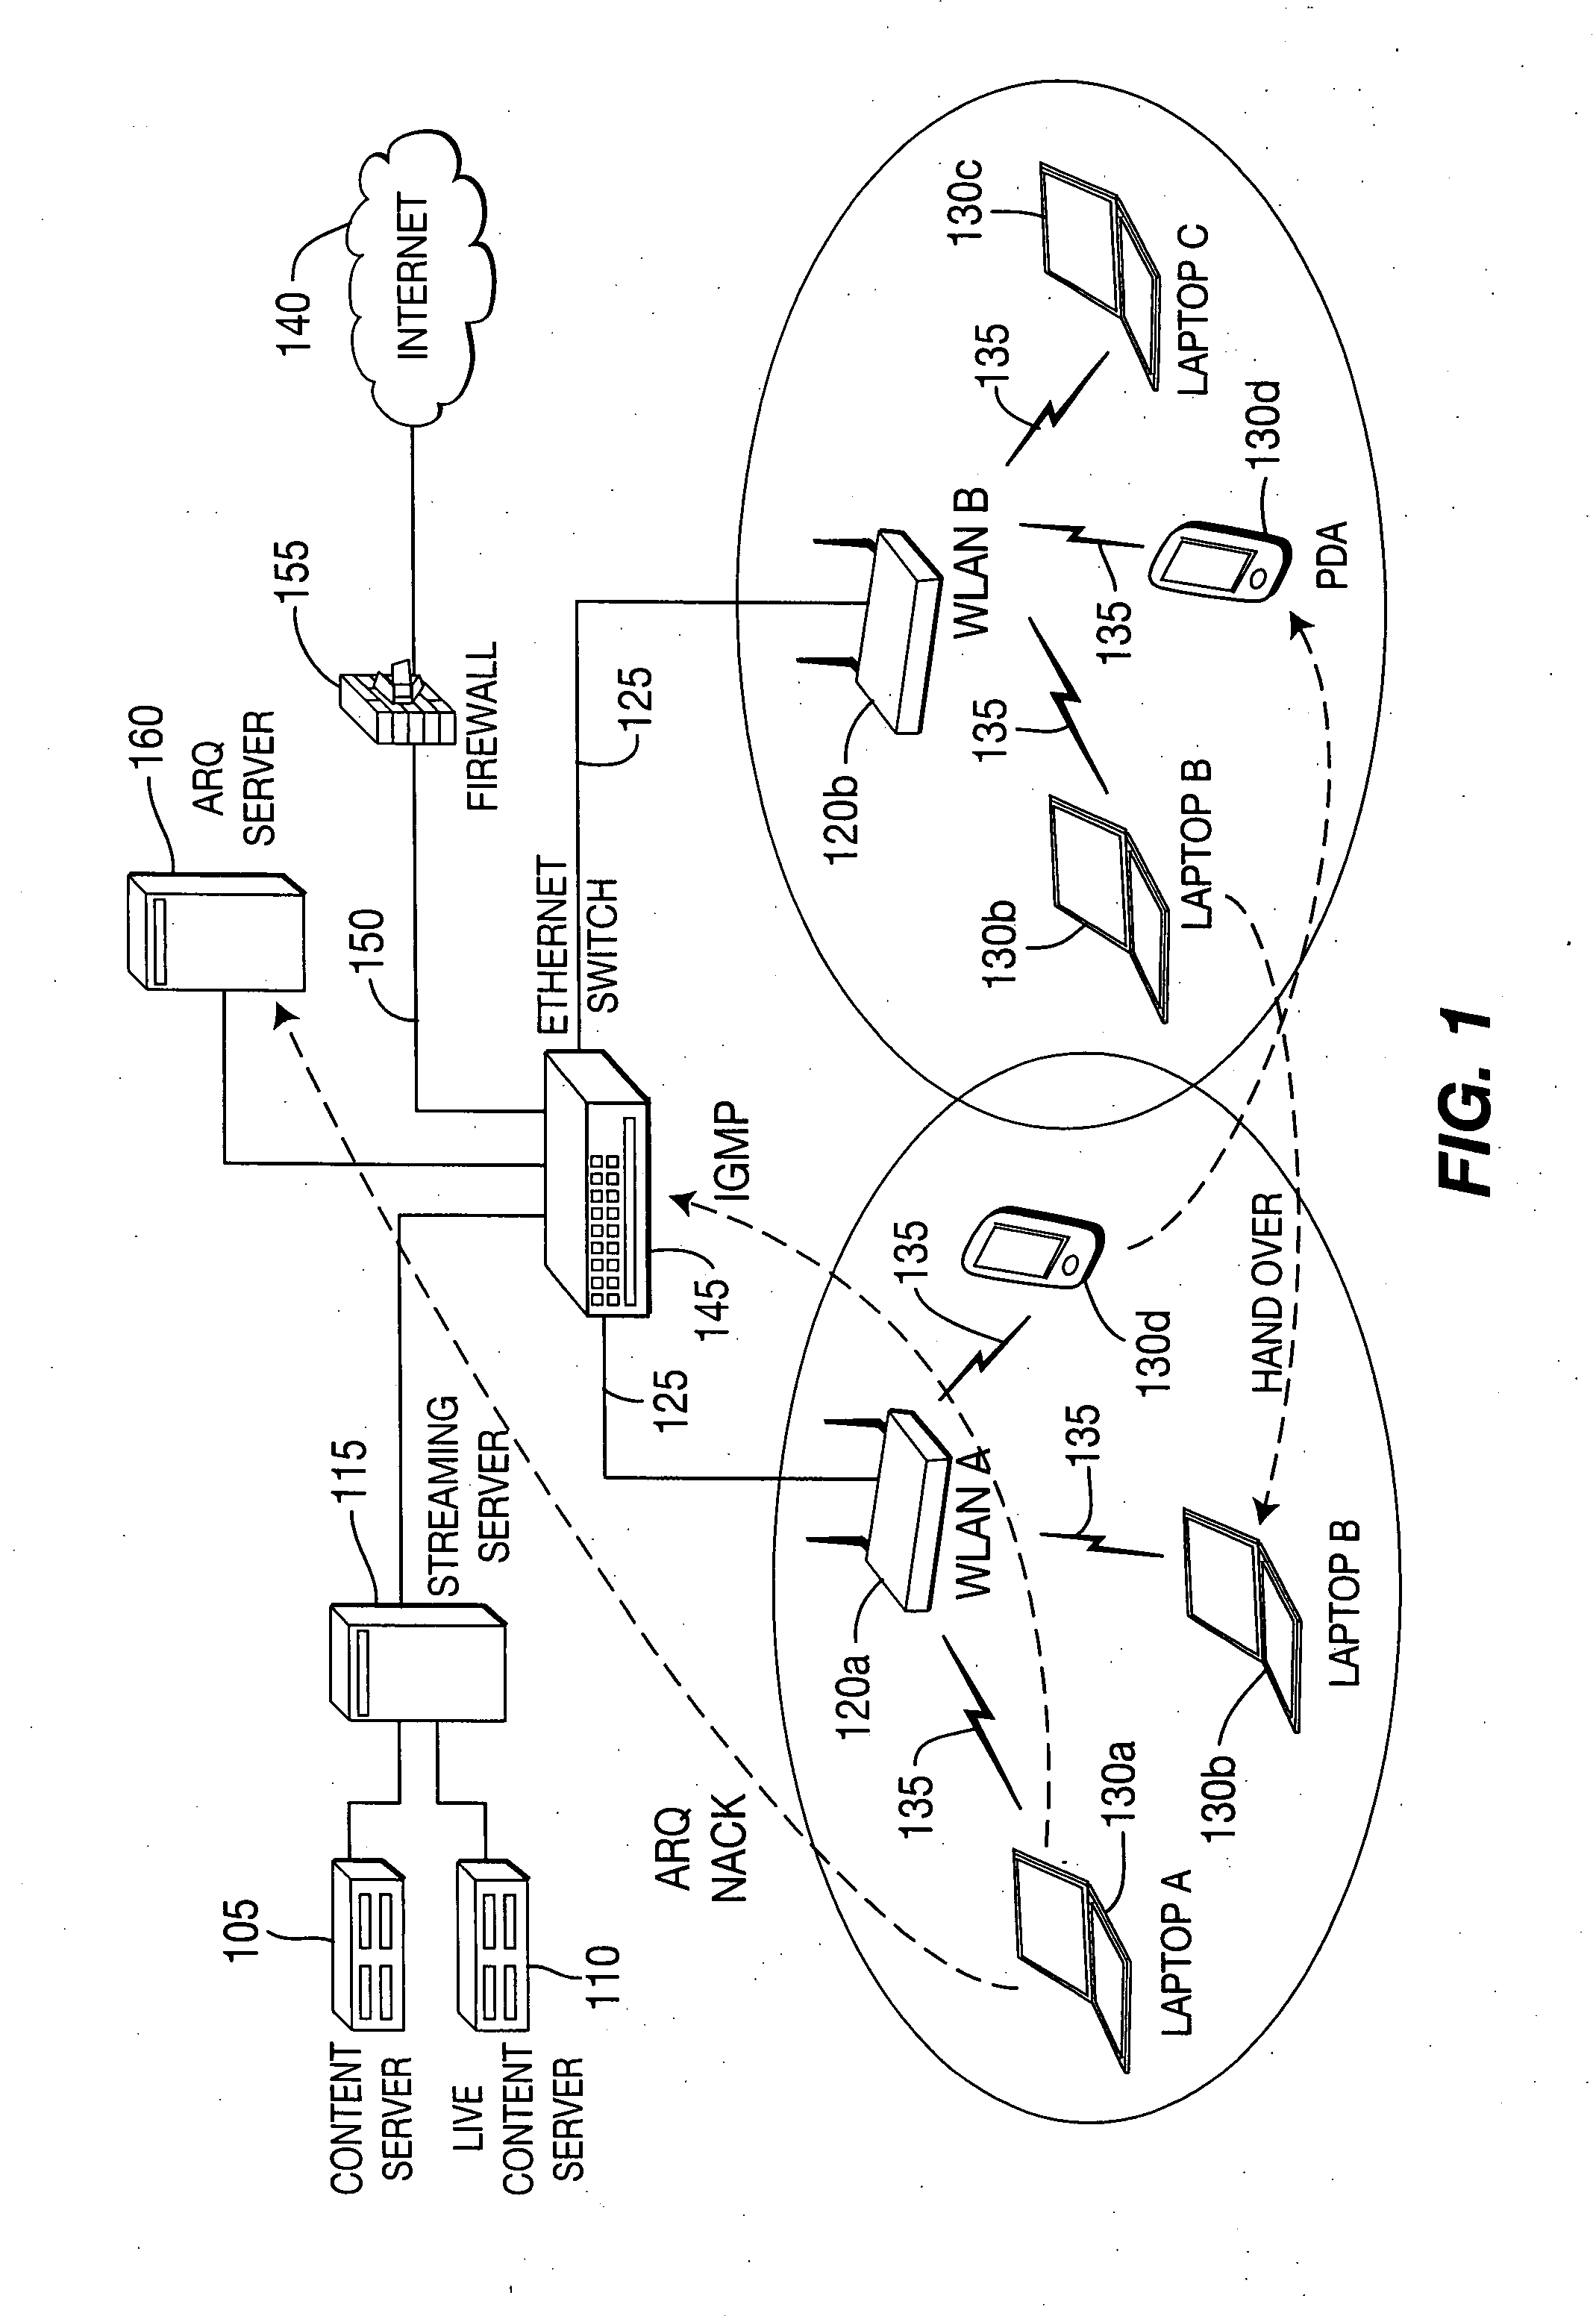 Method and apparatus for adaptive forward error correction with merged automatic repeat request for reliable multicast in wireless local area networks